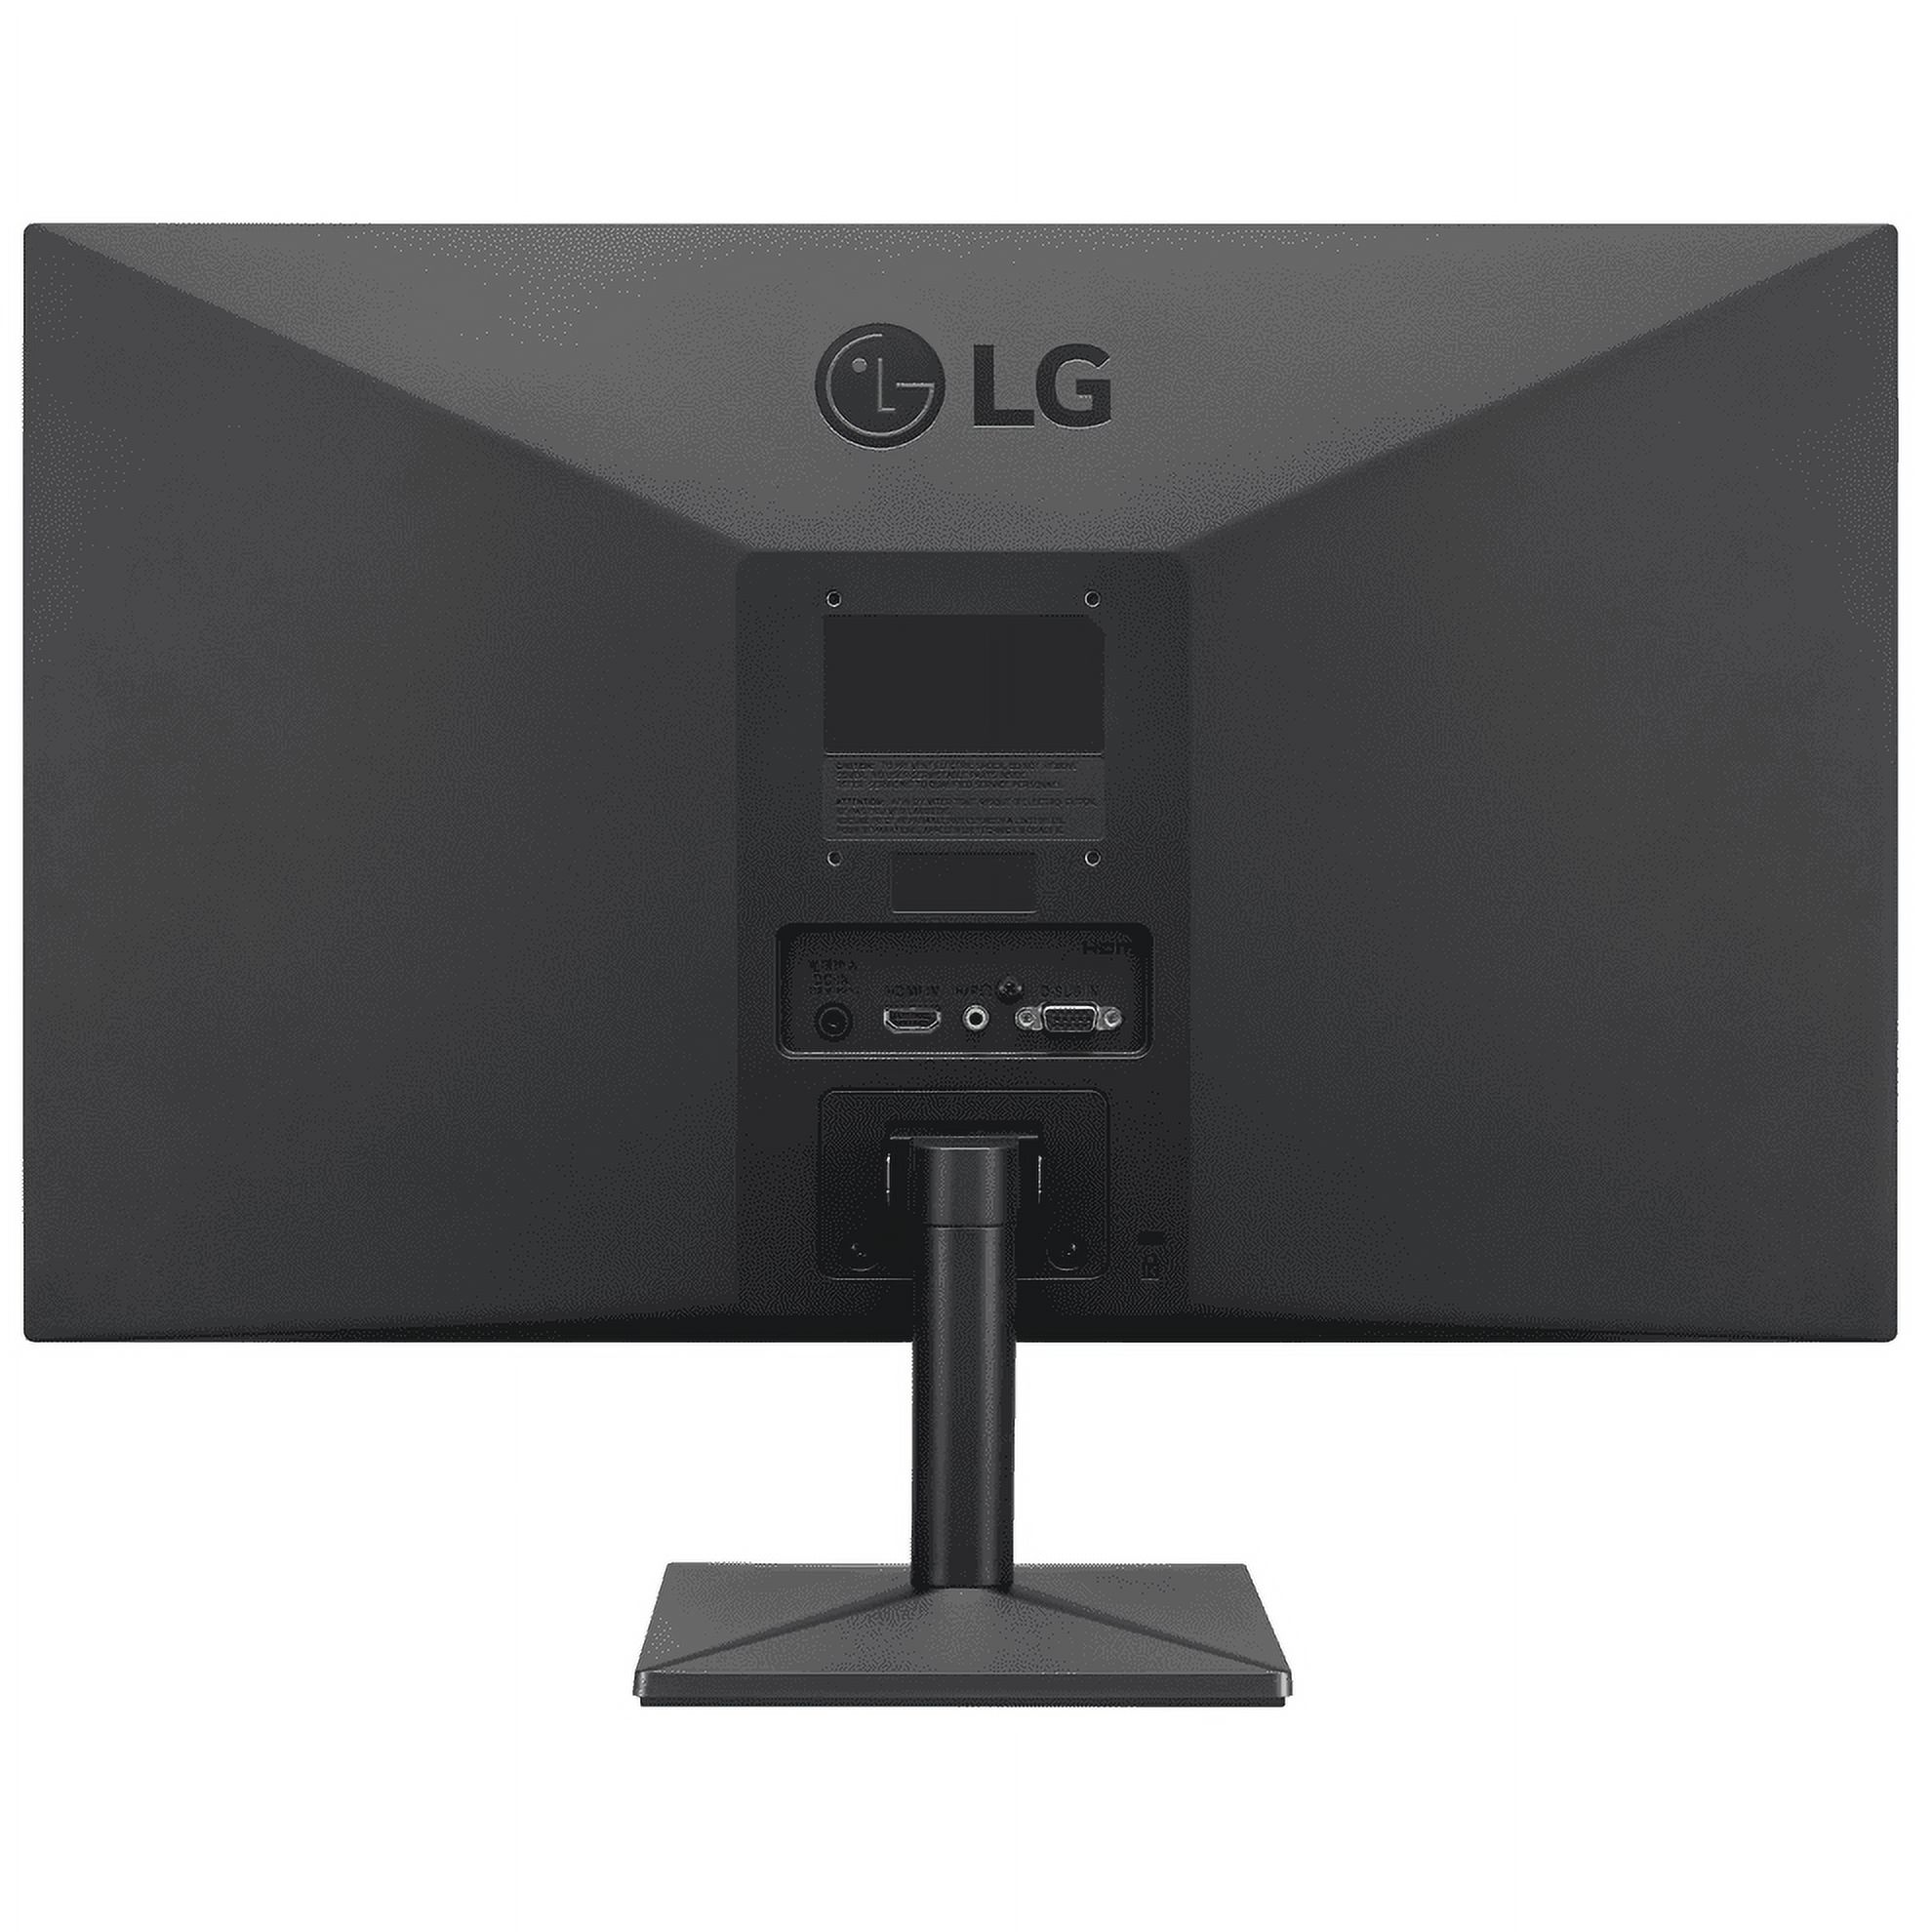 LG Electronics 24MK430H-B 24-inch Class IPS LED Monitor with AMD - image 4 of 9